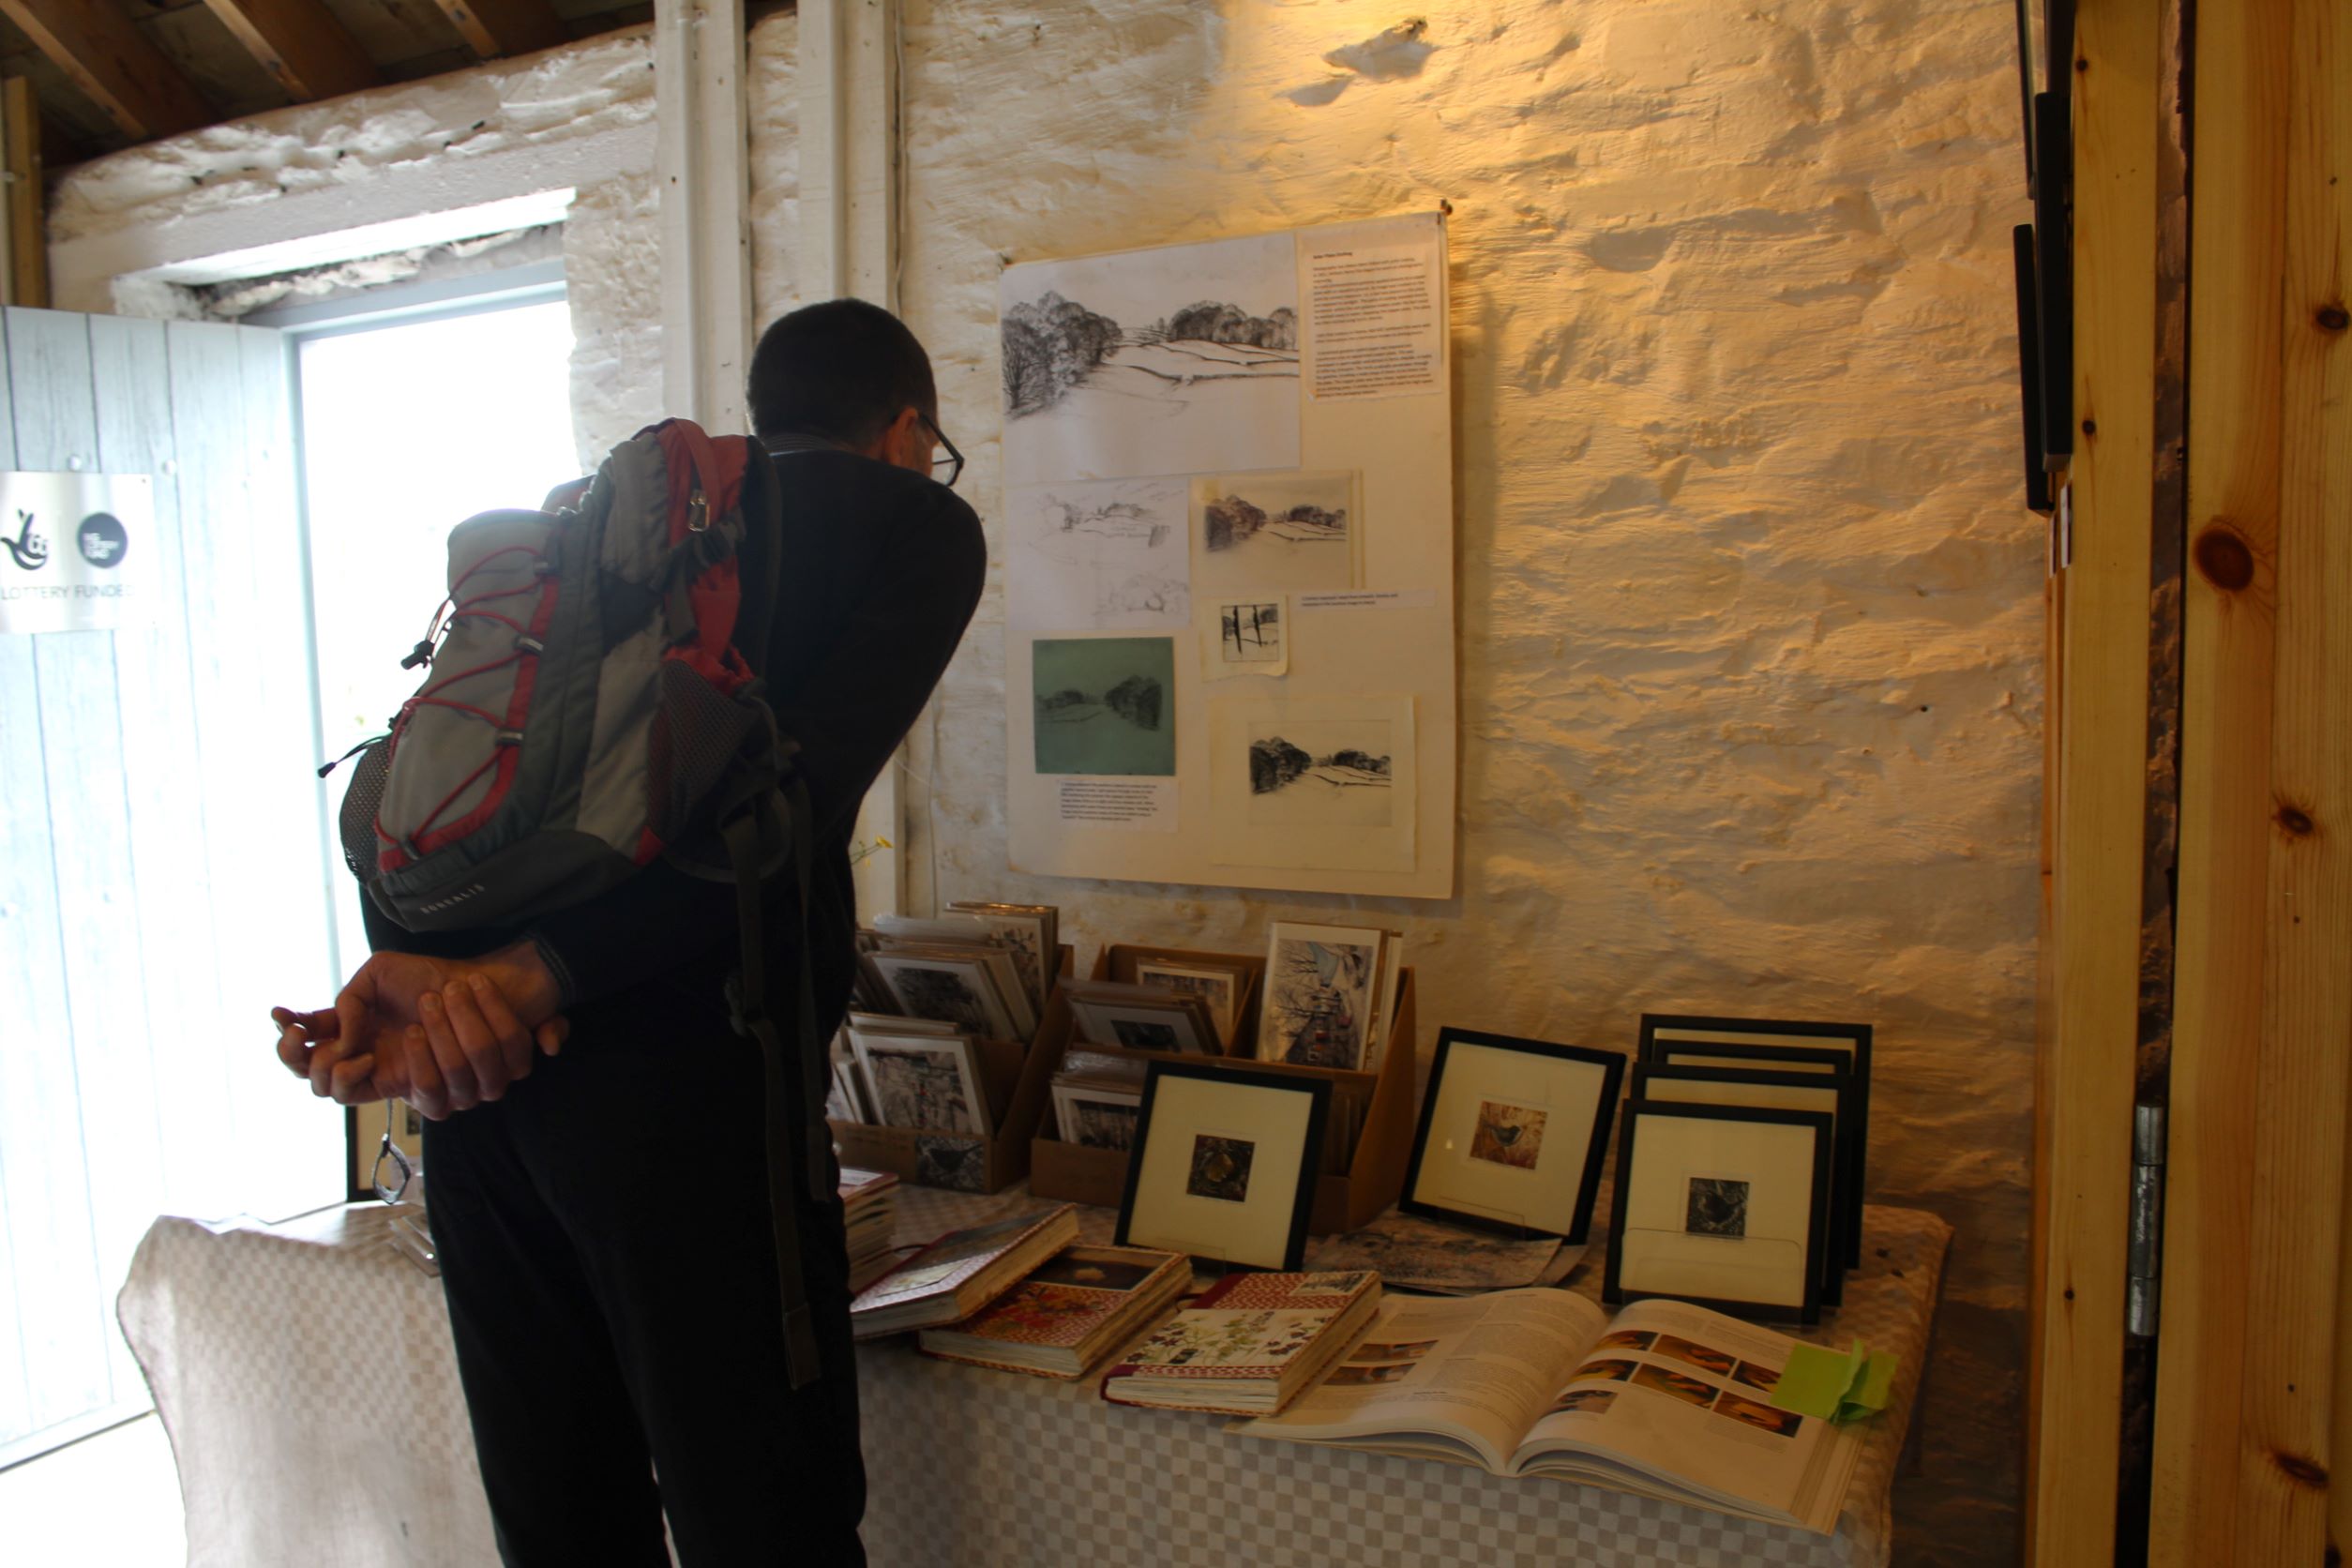 A visitor looks at prints on display in a studio